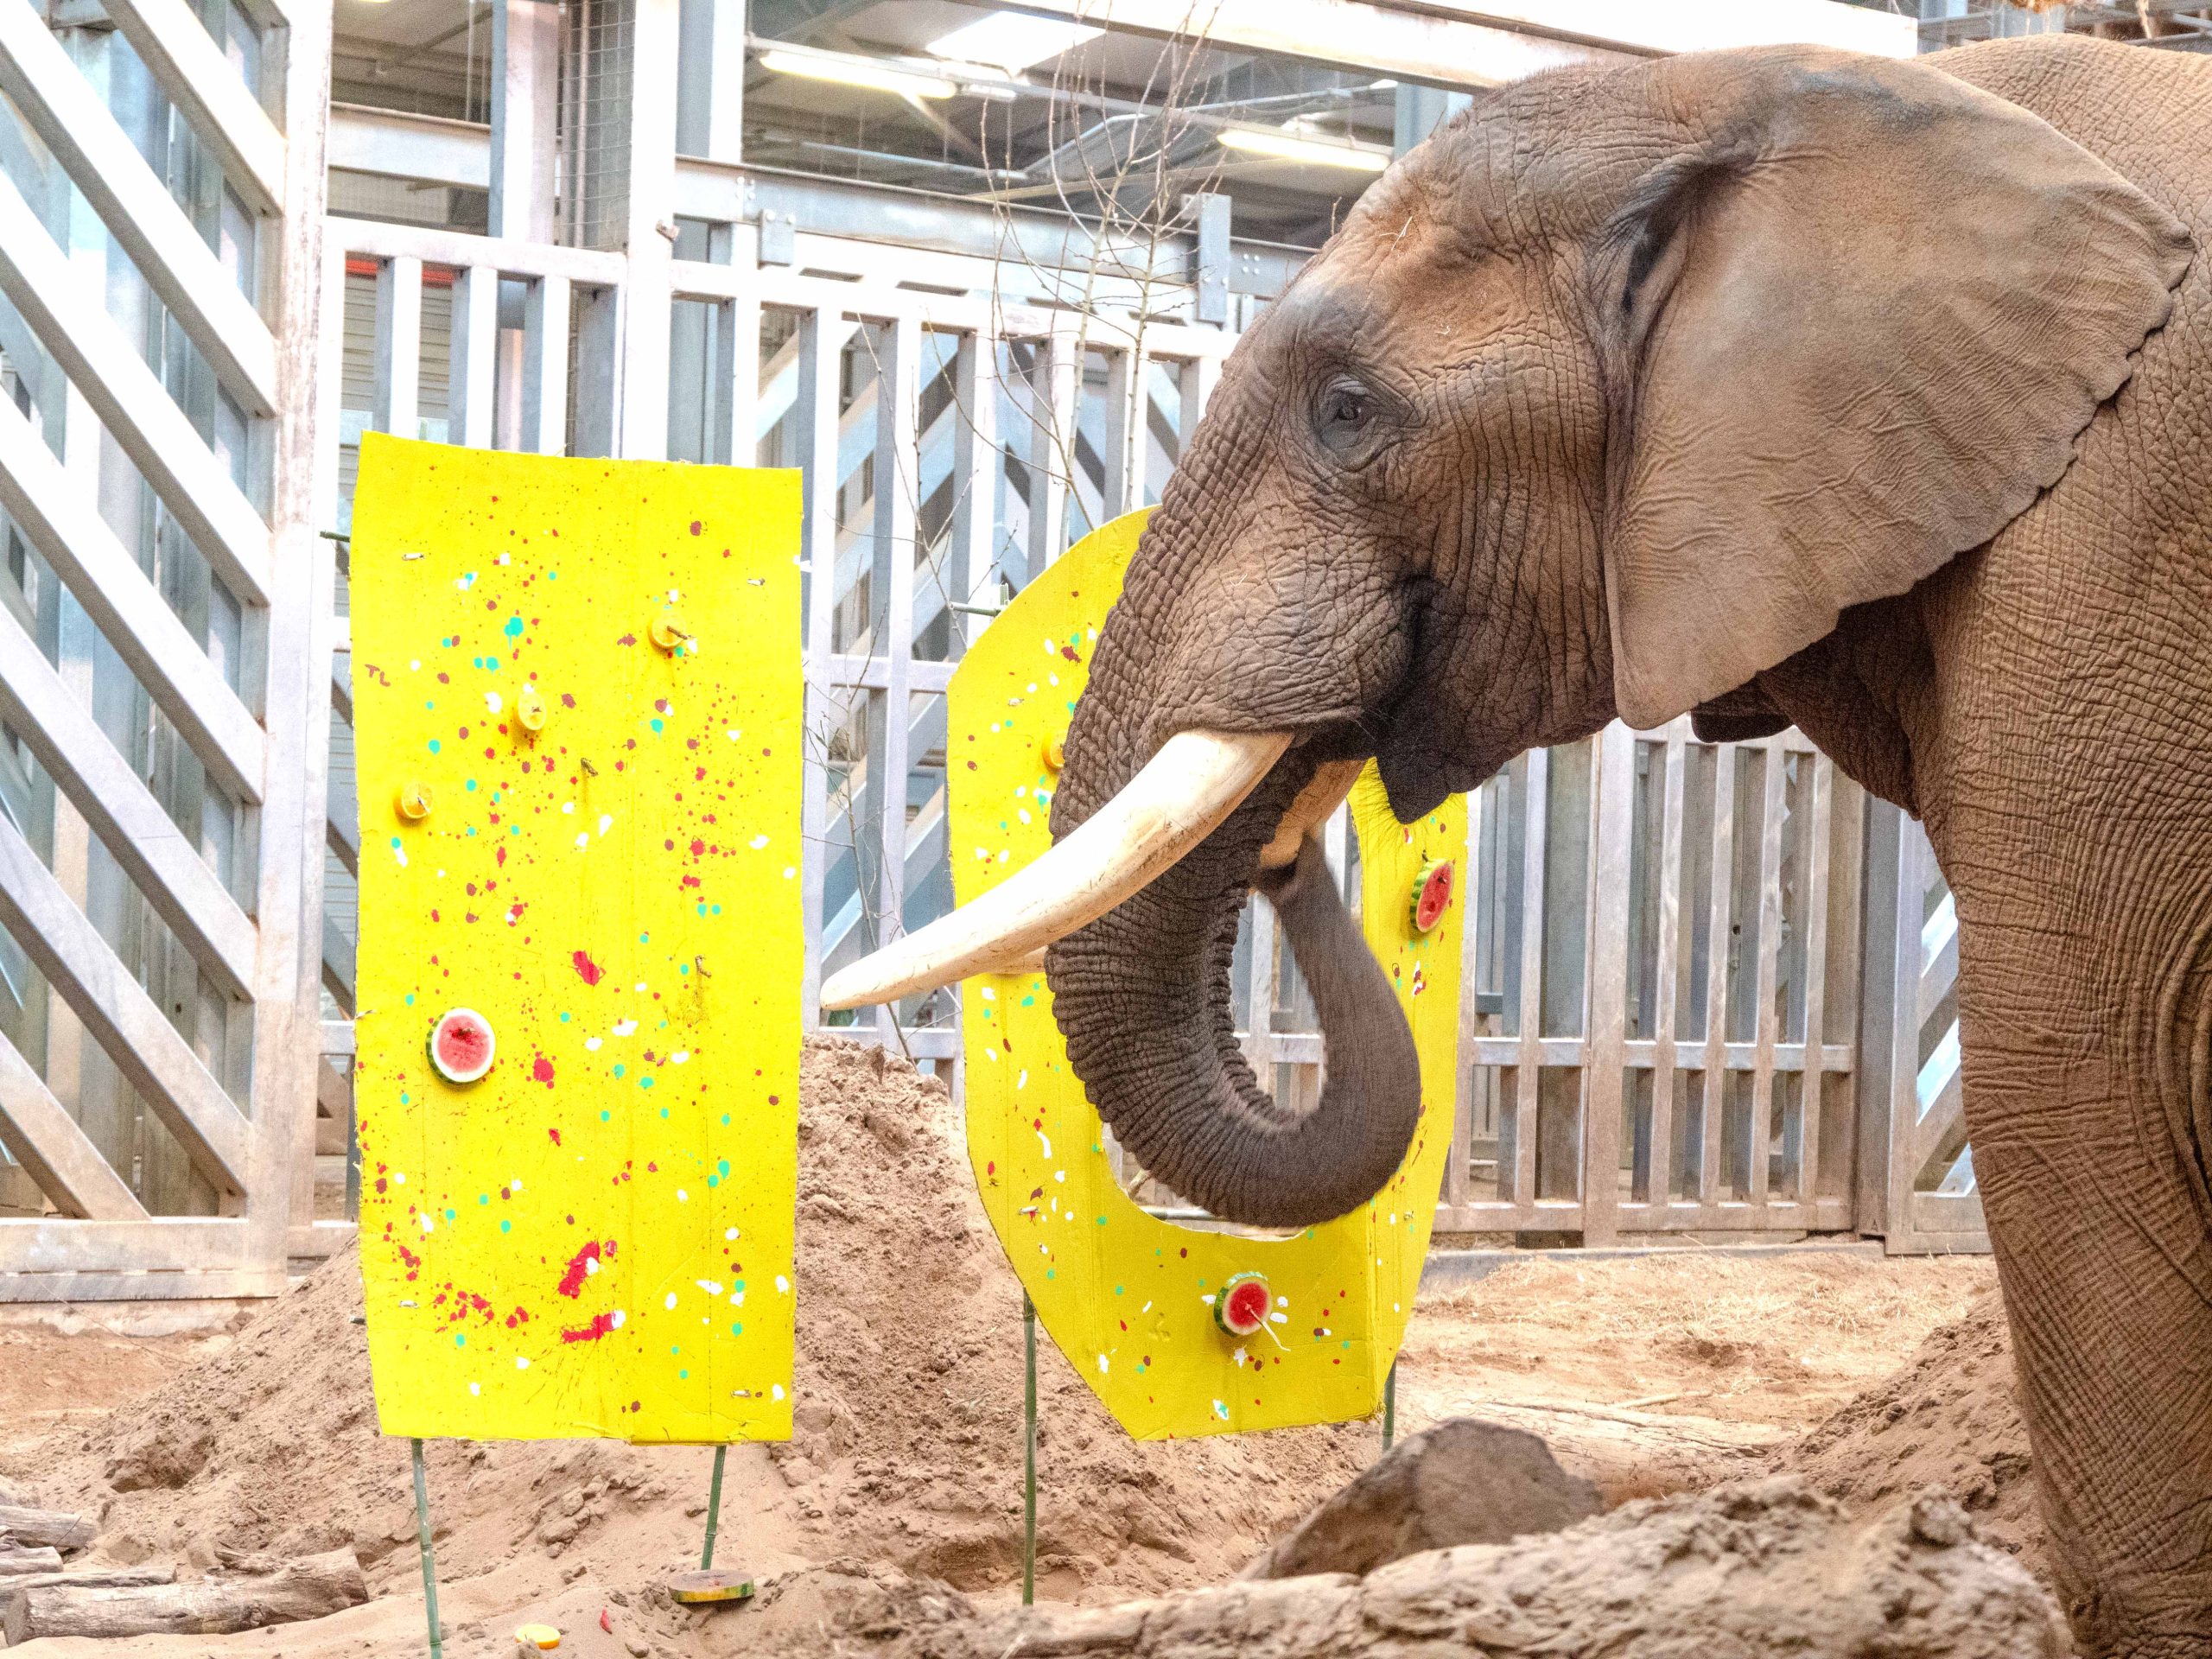 Eden for elephants. 10 years of pioneering welfare innovation at the UK’s largest elephant habitat.